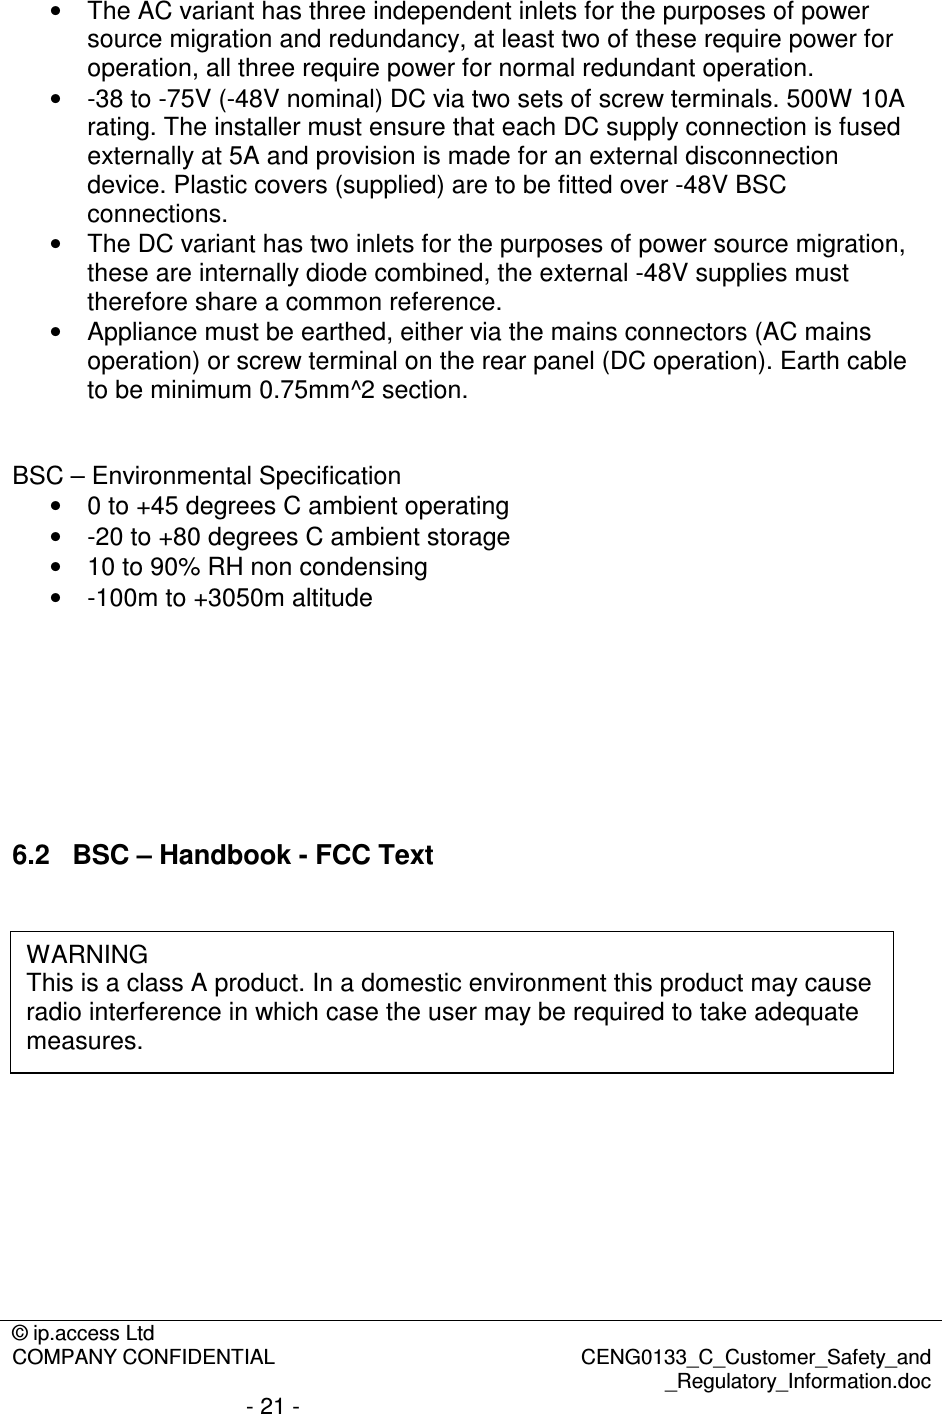 © ip.access Ltd  COMPANY CONFIDENTIAL  CENG0133_C_Customer_Safety_and _Regulatory_Information.doc - 21 -  •  The AC variant has three independent inlets for the purposes of power source migration and redundancy, at least two of these require power for operation, all three require power for normal redundant operation. •  -38 to -75V (-48V nominal) DC via two sets of screw terminals. 500W 10A rating. The installer must ensure that each DC supply connection is fused externally at 5A and provision is made for an external disconnection device. Plastic covers (supplied) are to be fitted over -48V BSC connections. •  The DC variant has two inlets for the purposes of power source migration, these are internally diode combined, the external -48V supplies must therefore share a common reference. •  Appliance must be earthed, either via the mains connectors (AC mains operation) or screw terminal on the rear panel (DC operation). Earth cable to be minimum 0.75mm^2 section.   BSC – Environmental Specification •  0 to +45 degrees C ambient operating •  -20 to +80 degrees C ambient storage •  10 to 90% RH non condensing •  -100m to +3050m altitude        6.2  BSC – Handbook - FCC Text         WARNING This is a class A product. In a domestic environment this product may cause radio interference in which case the user may be required to take adequate measures. 